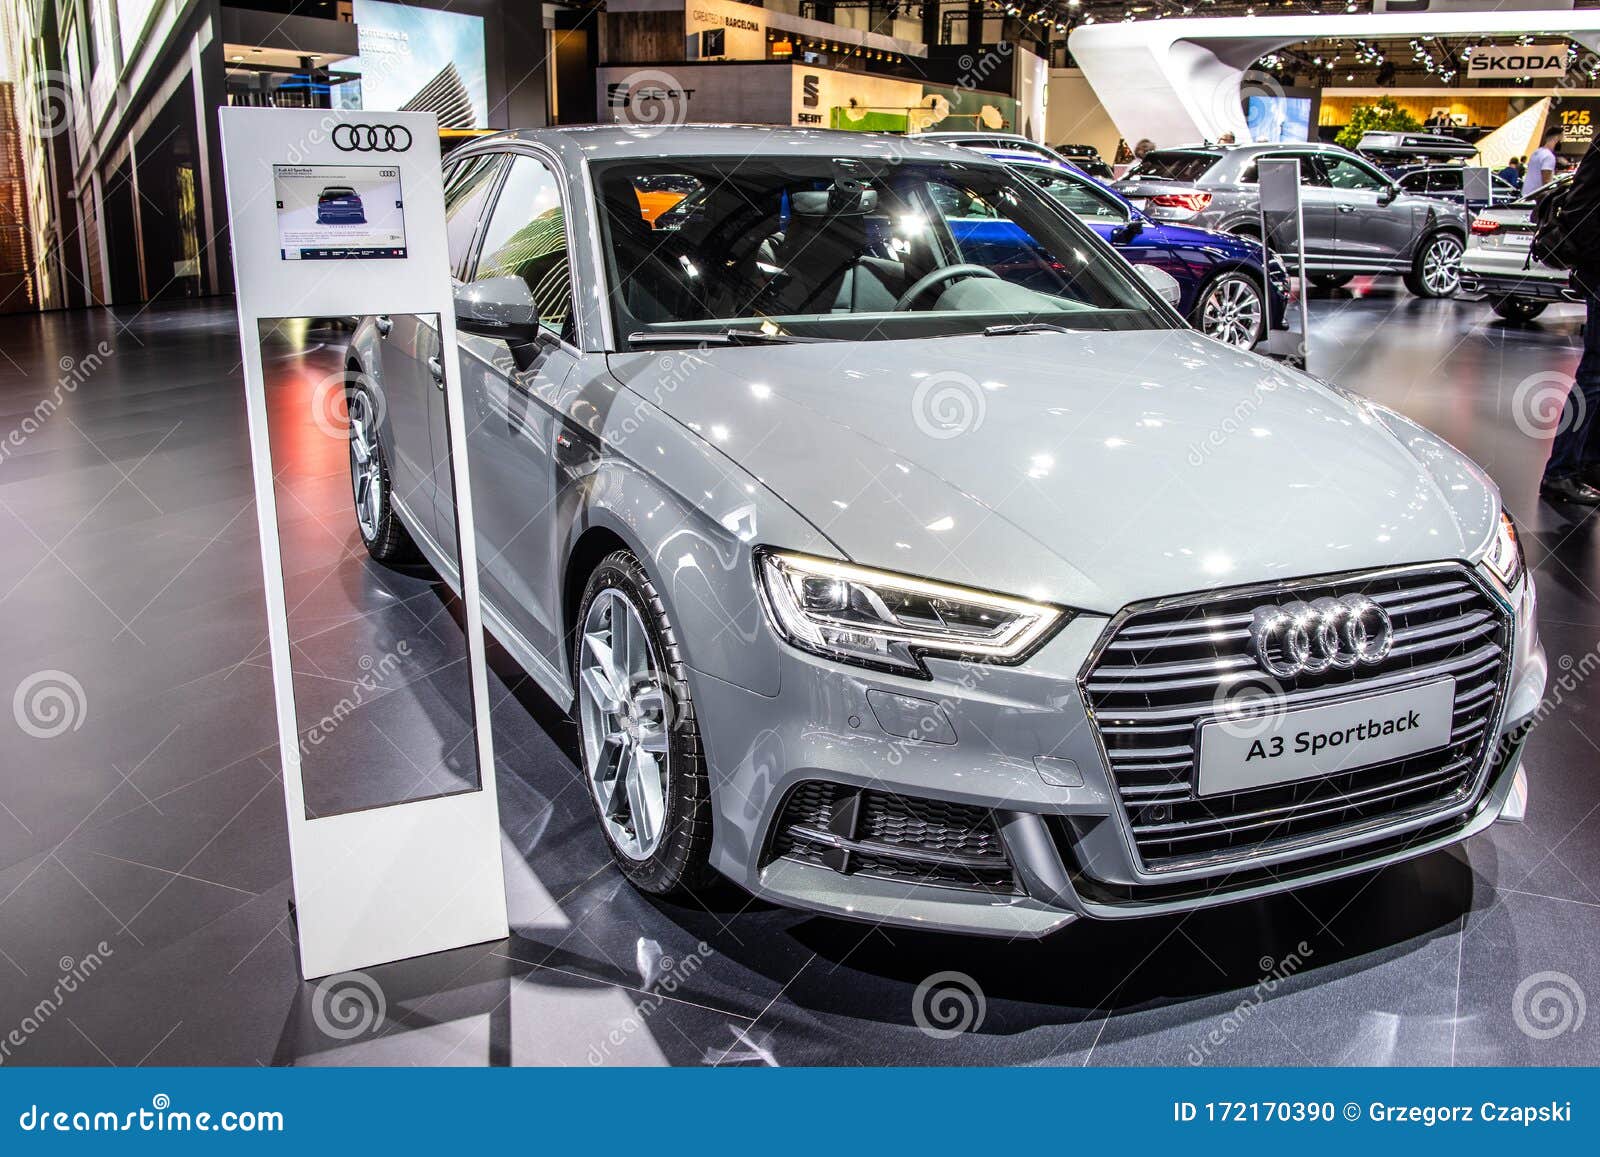 A3 Sportback TFSI at Brussels Motor Show, Third Generation, Typ 8V, Car Produced by Audi AG Image - Image of dealer, luxury: 172170390